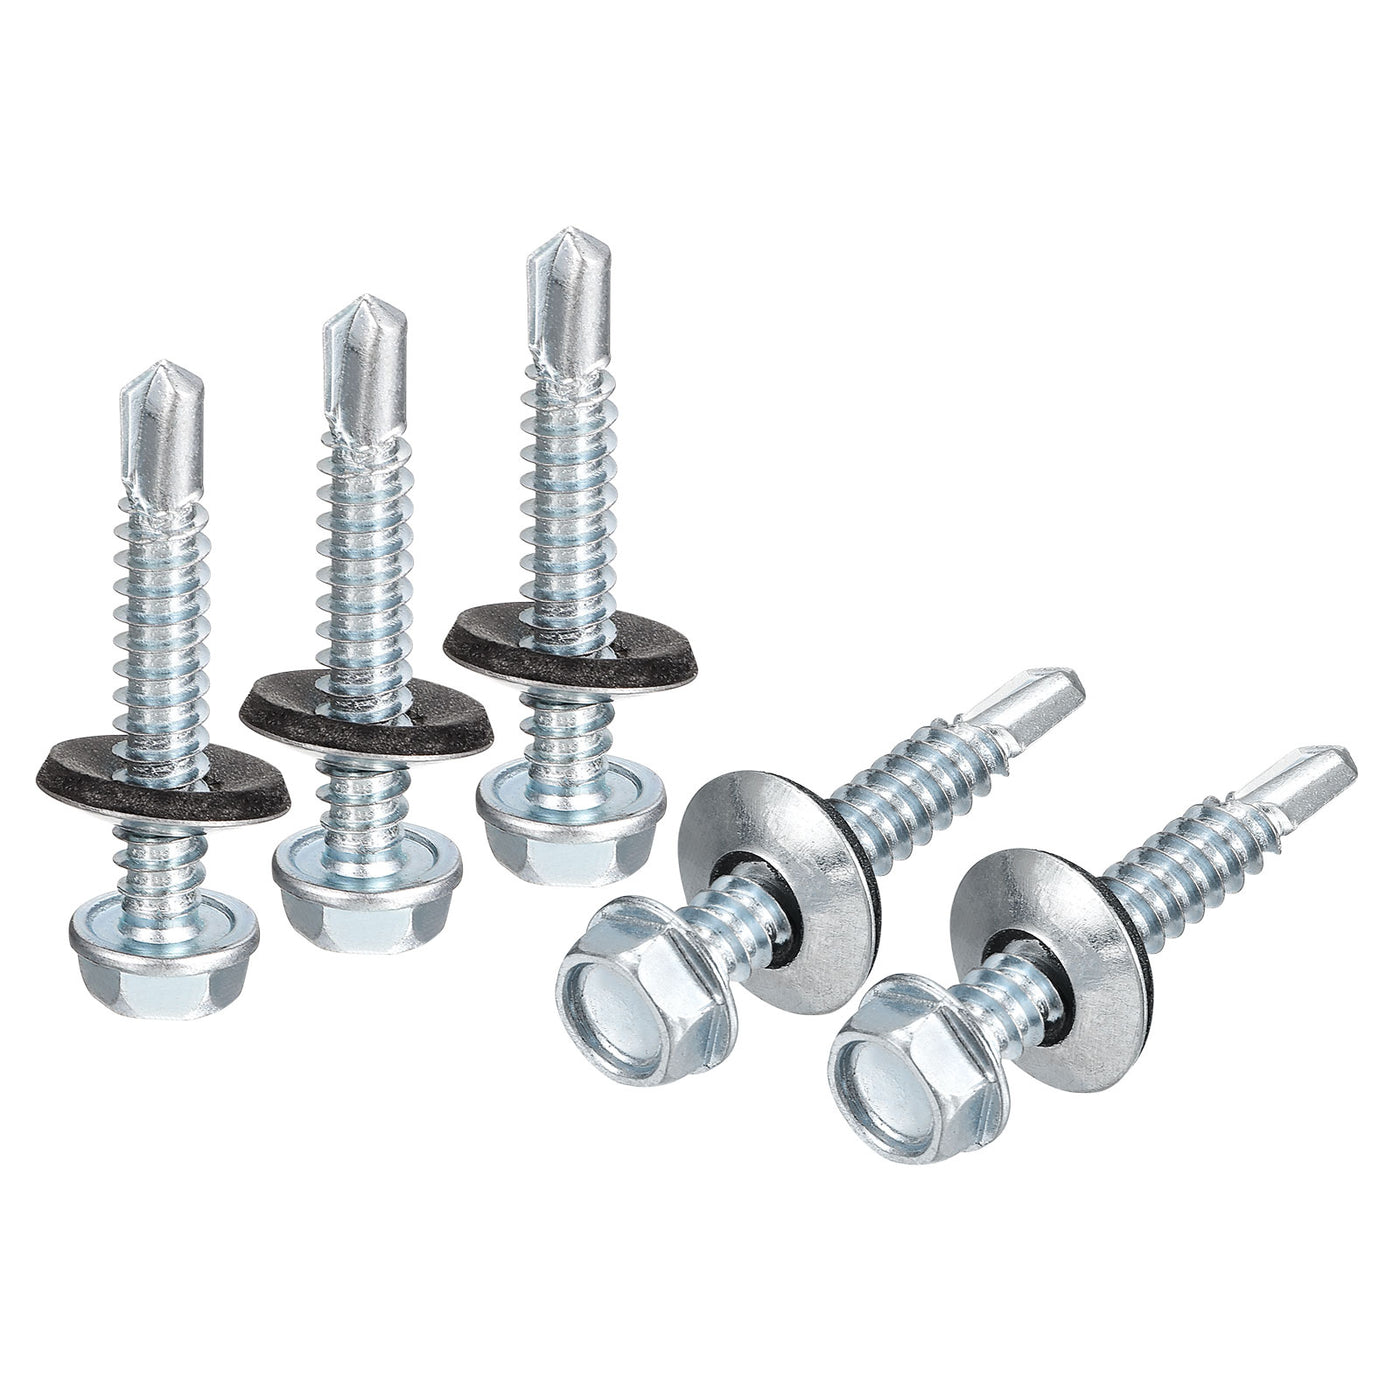 uxcell Uxcell #14 x 1-1/2" Self Drilling Screws, 50pcs Roofing Screws with EPDM Washer